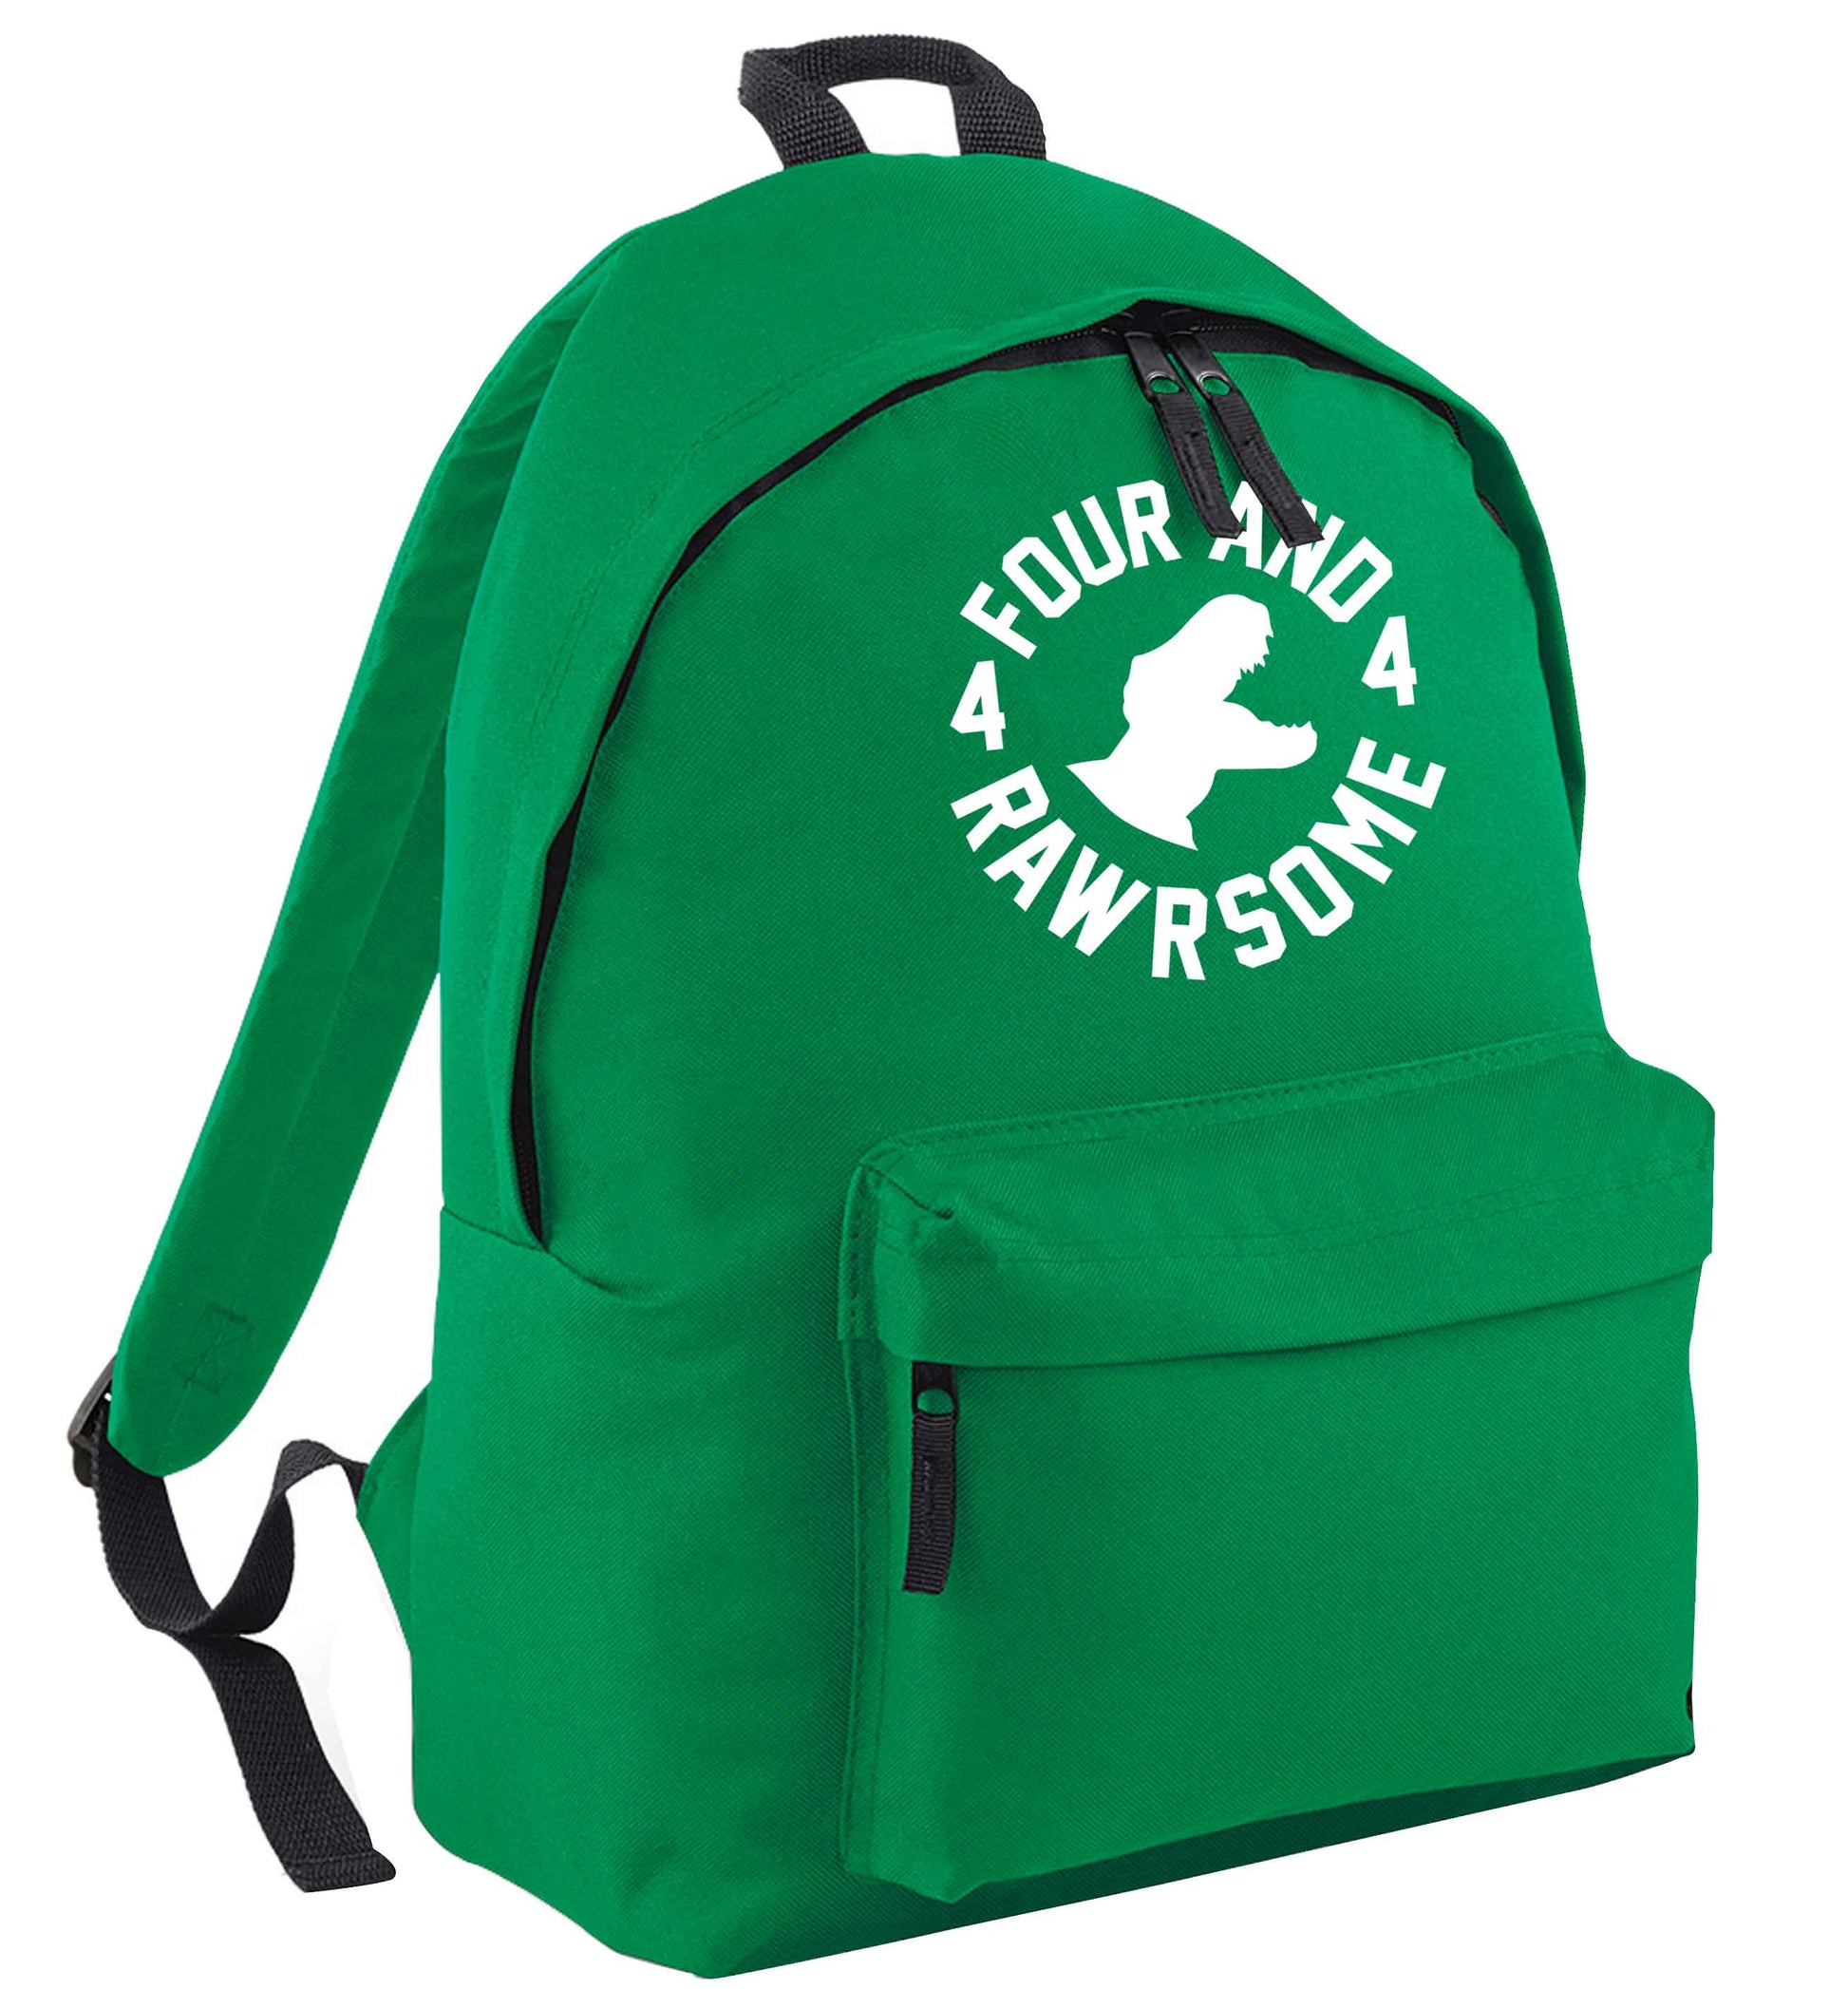 Four and rawrsome green adults backpack